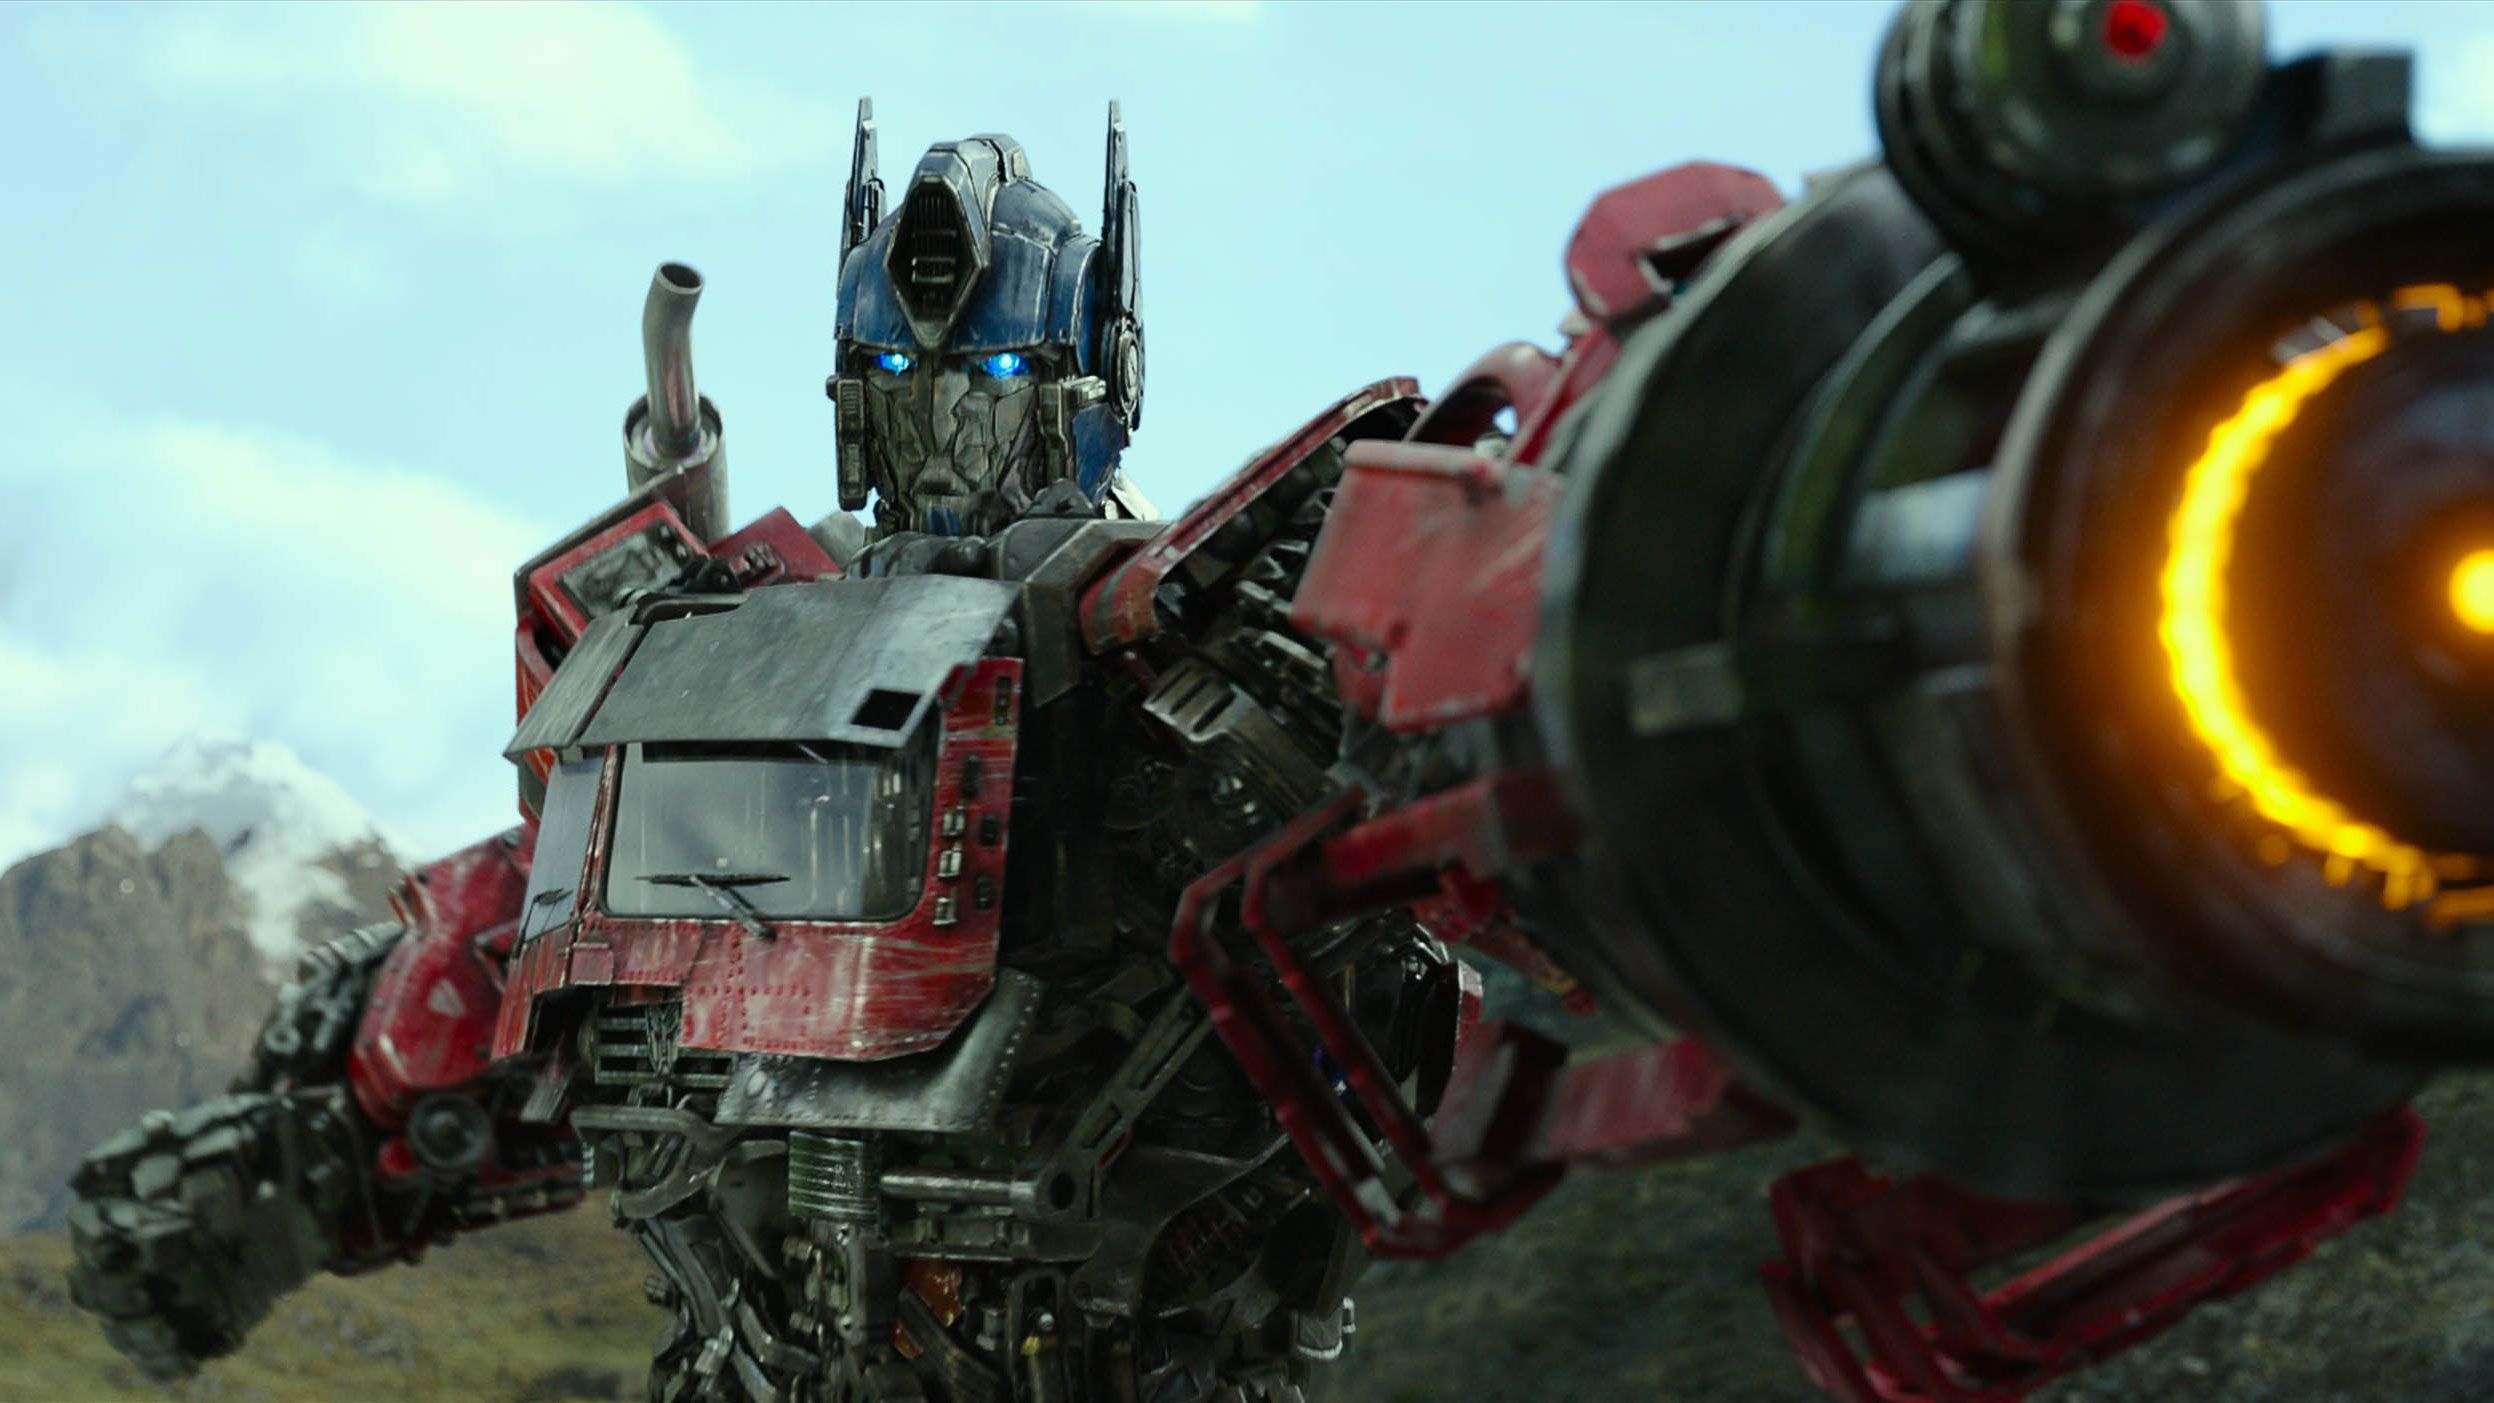 Transformers 8 Release Date Rumors: When Is It Coming Out?